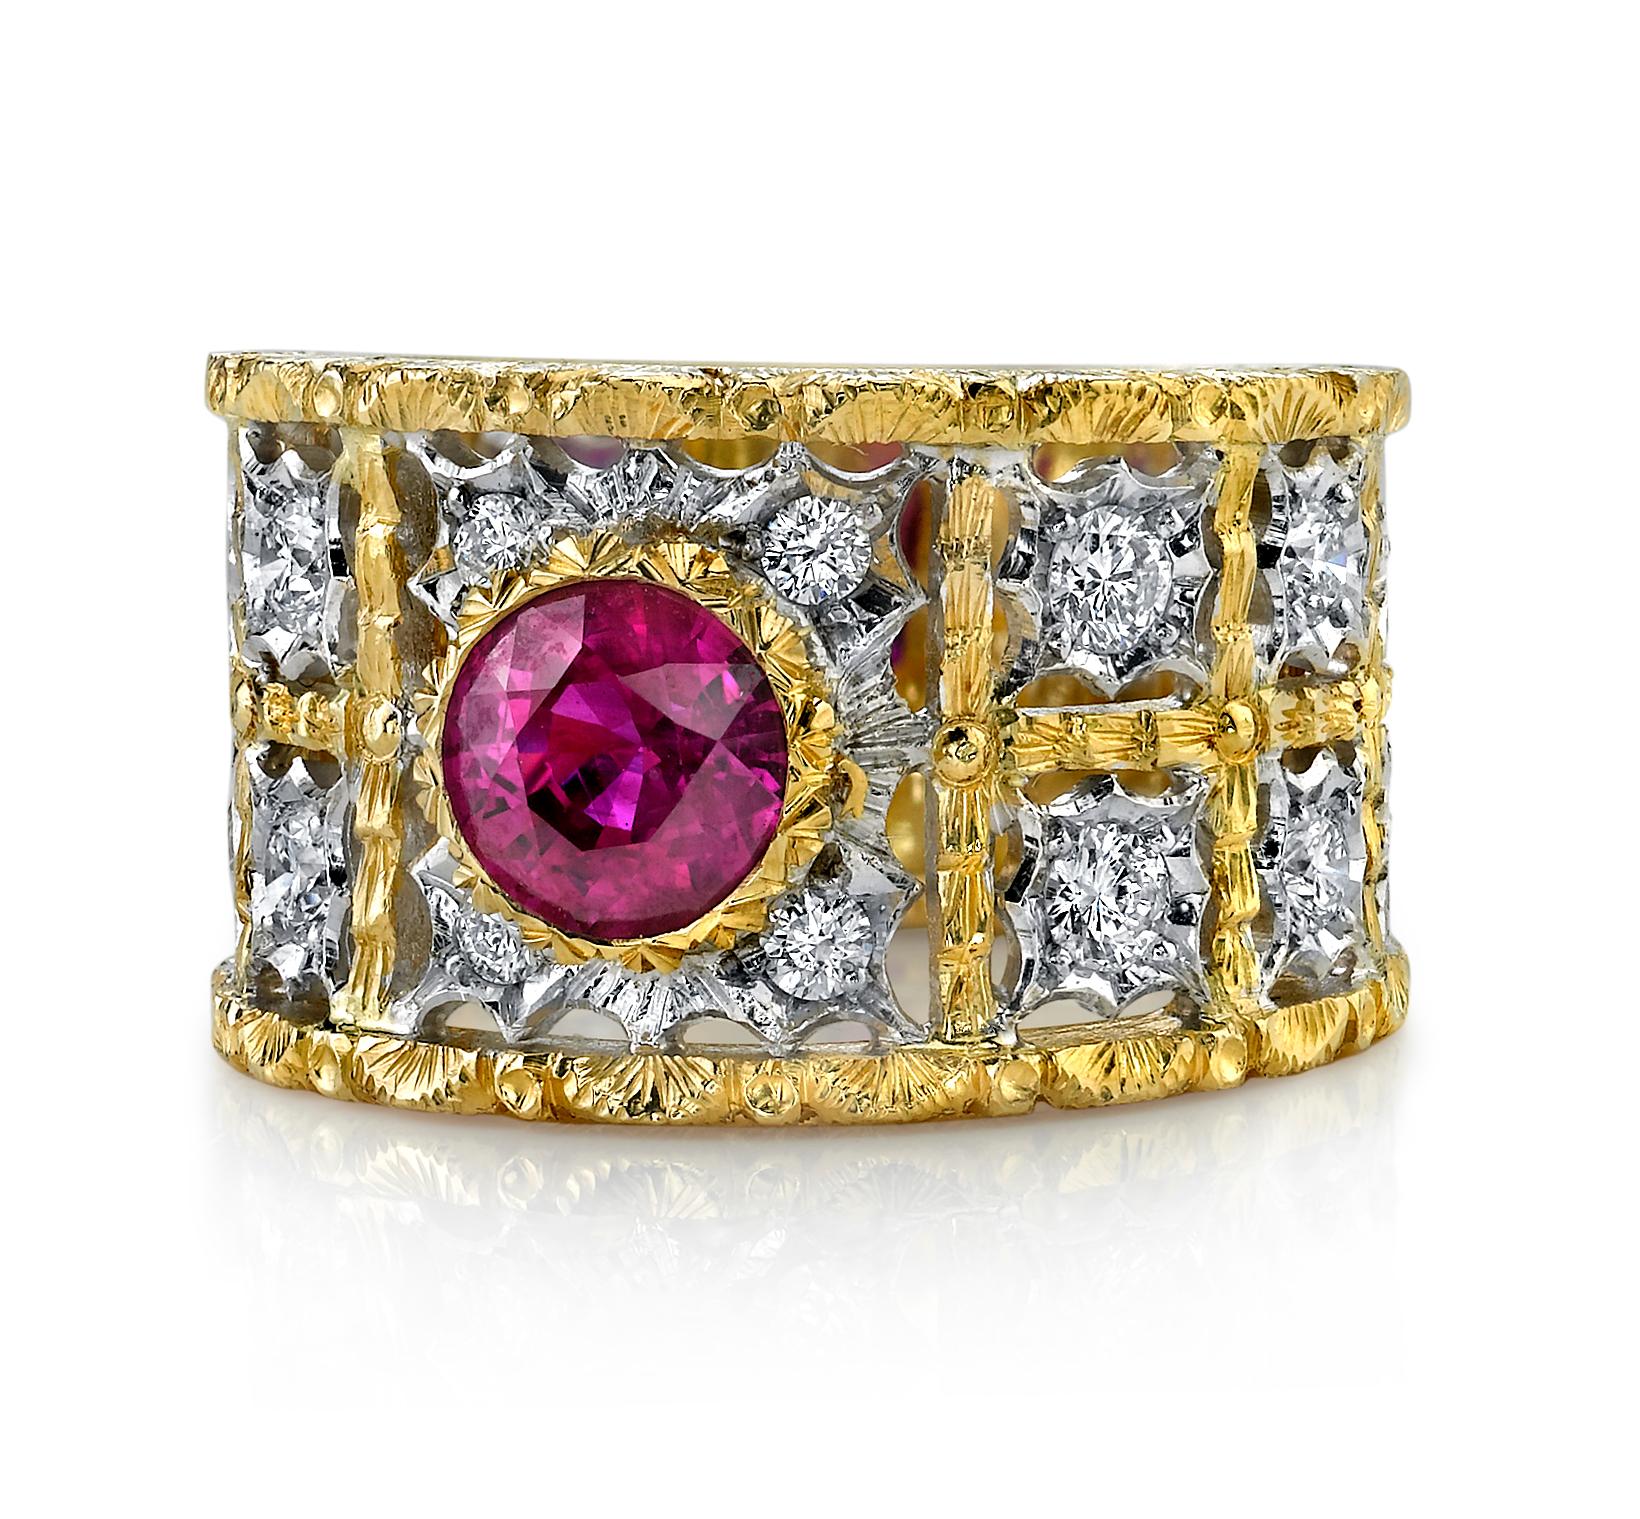 This spectacular ruby and diamond band has all the hallmarks of a timeless piece of heirloom jewelry. Made in Italy of 18k yellow and white gold, this ring features a superfine Burmese color ruby weighing 1.68 carats, set in a beautifully detailed